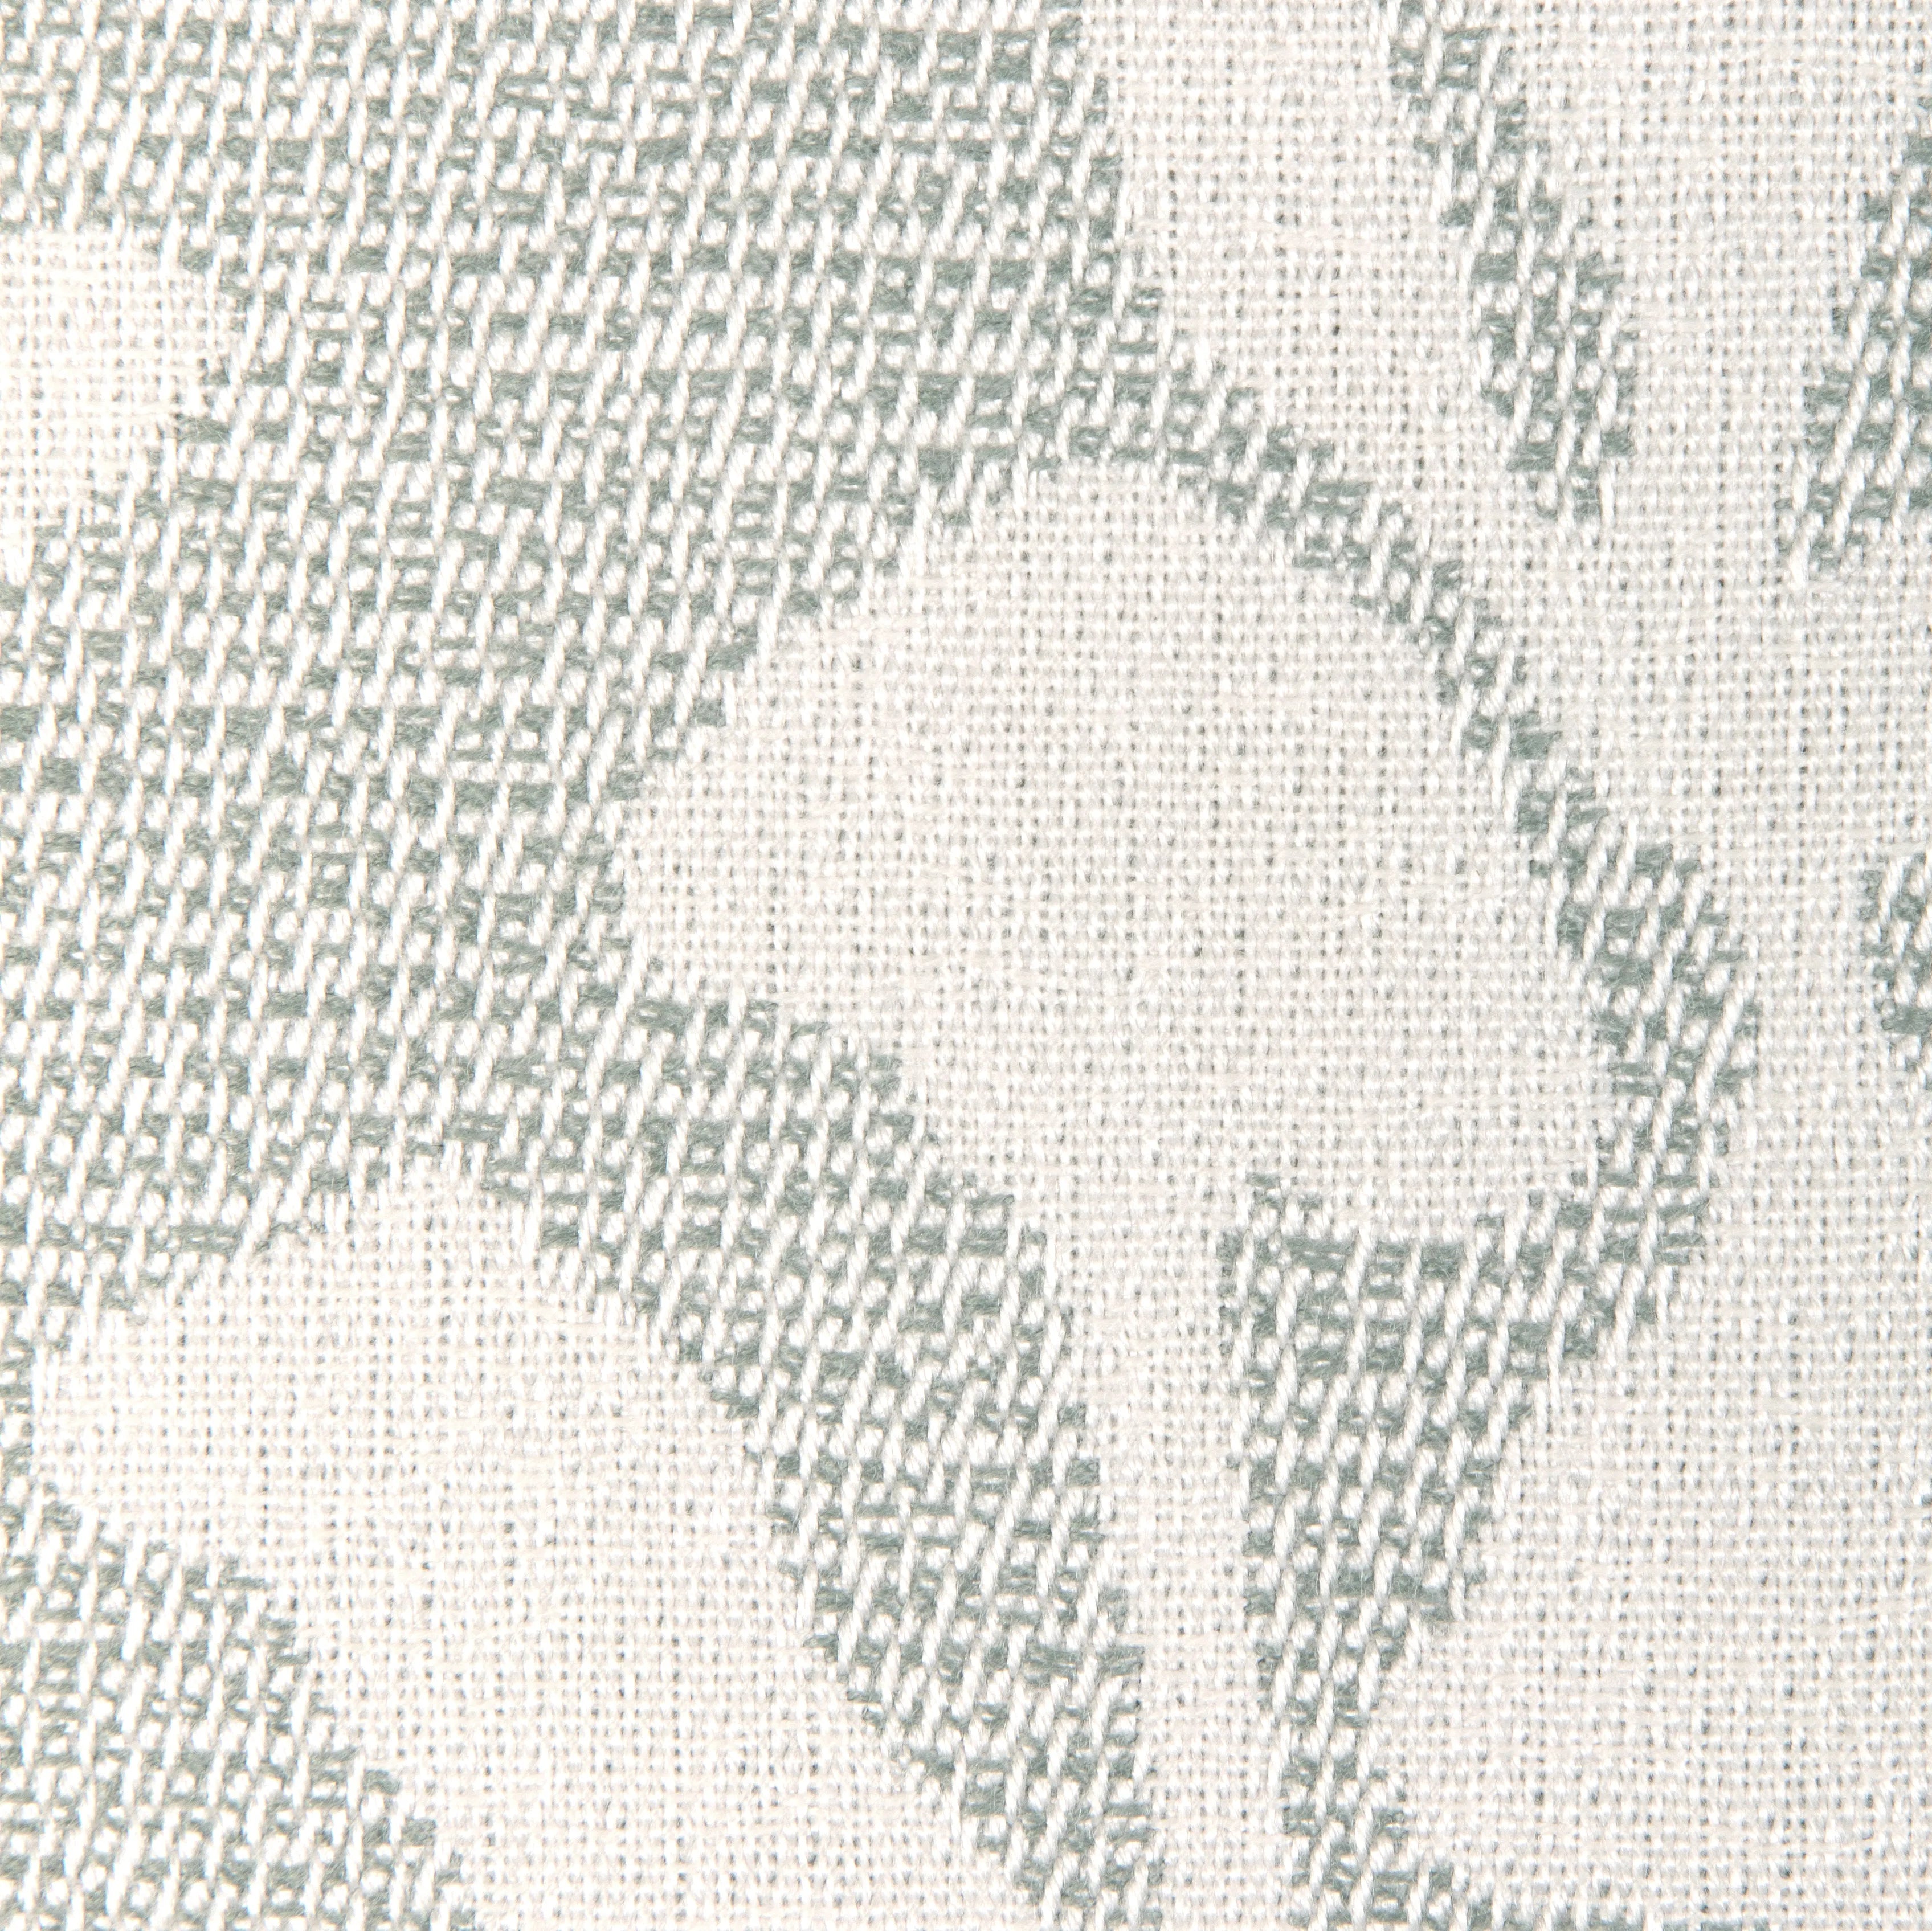 Closeup detail of Rose Cliff fabric in seaglass color - pattern 36937.15.0 - by Kravet Couture in the Riviera collection